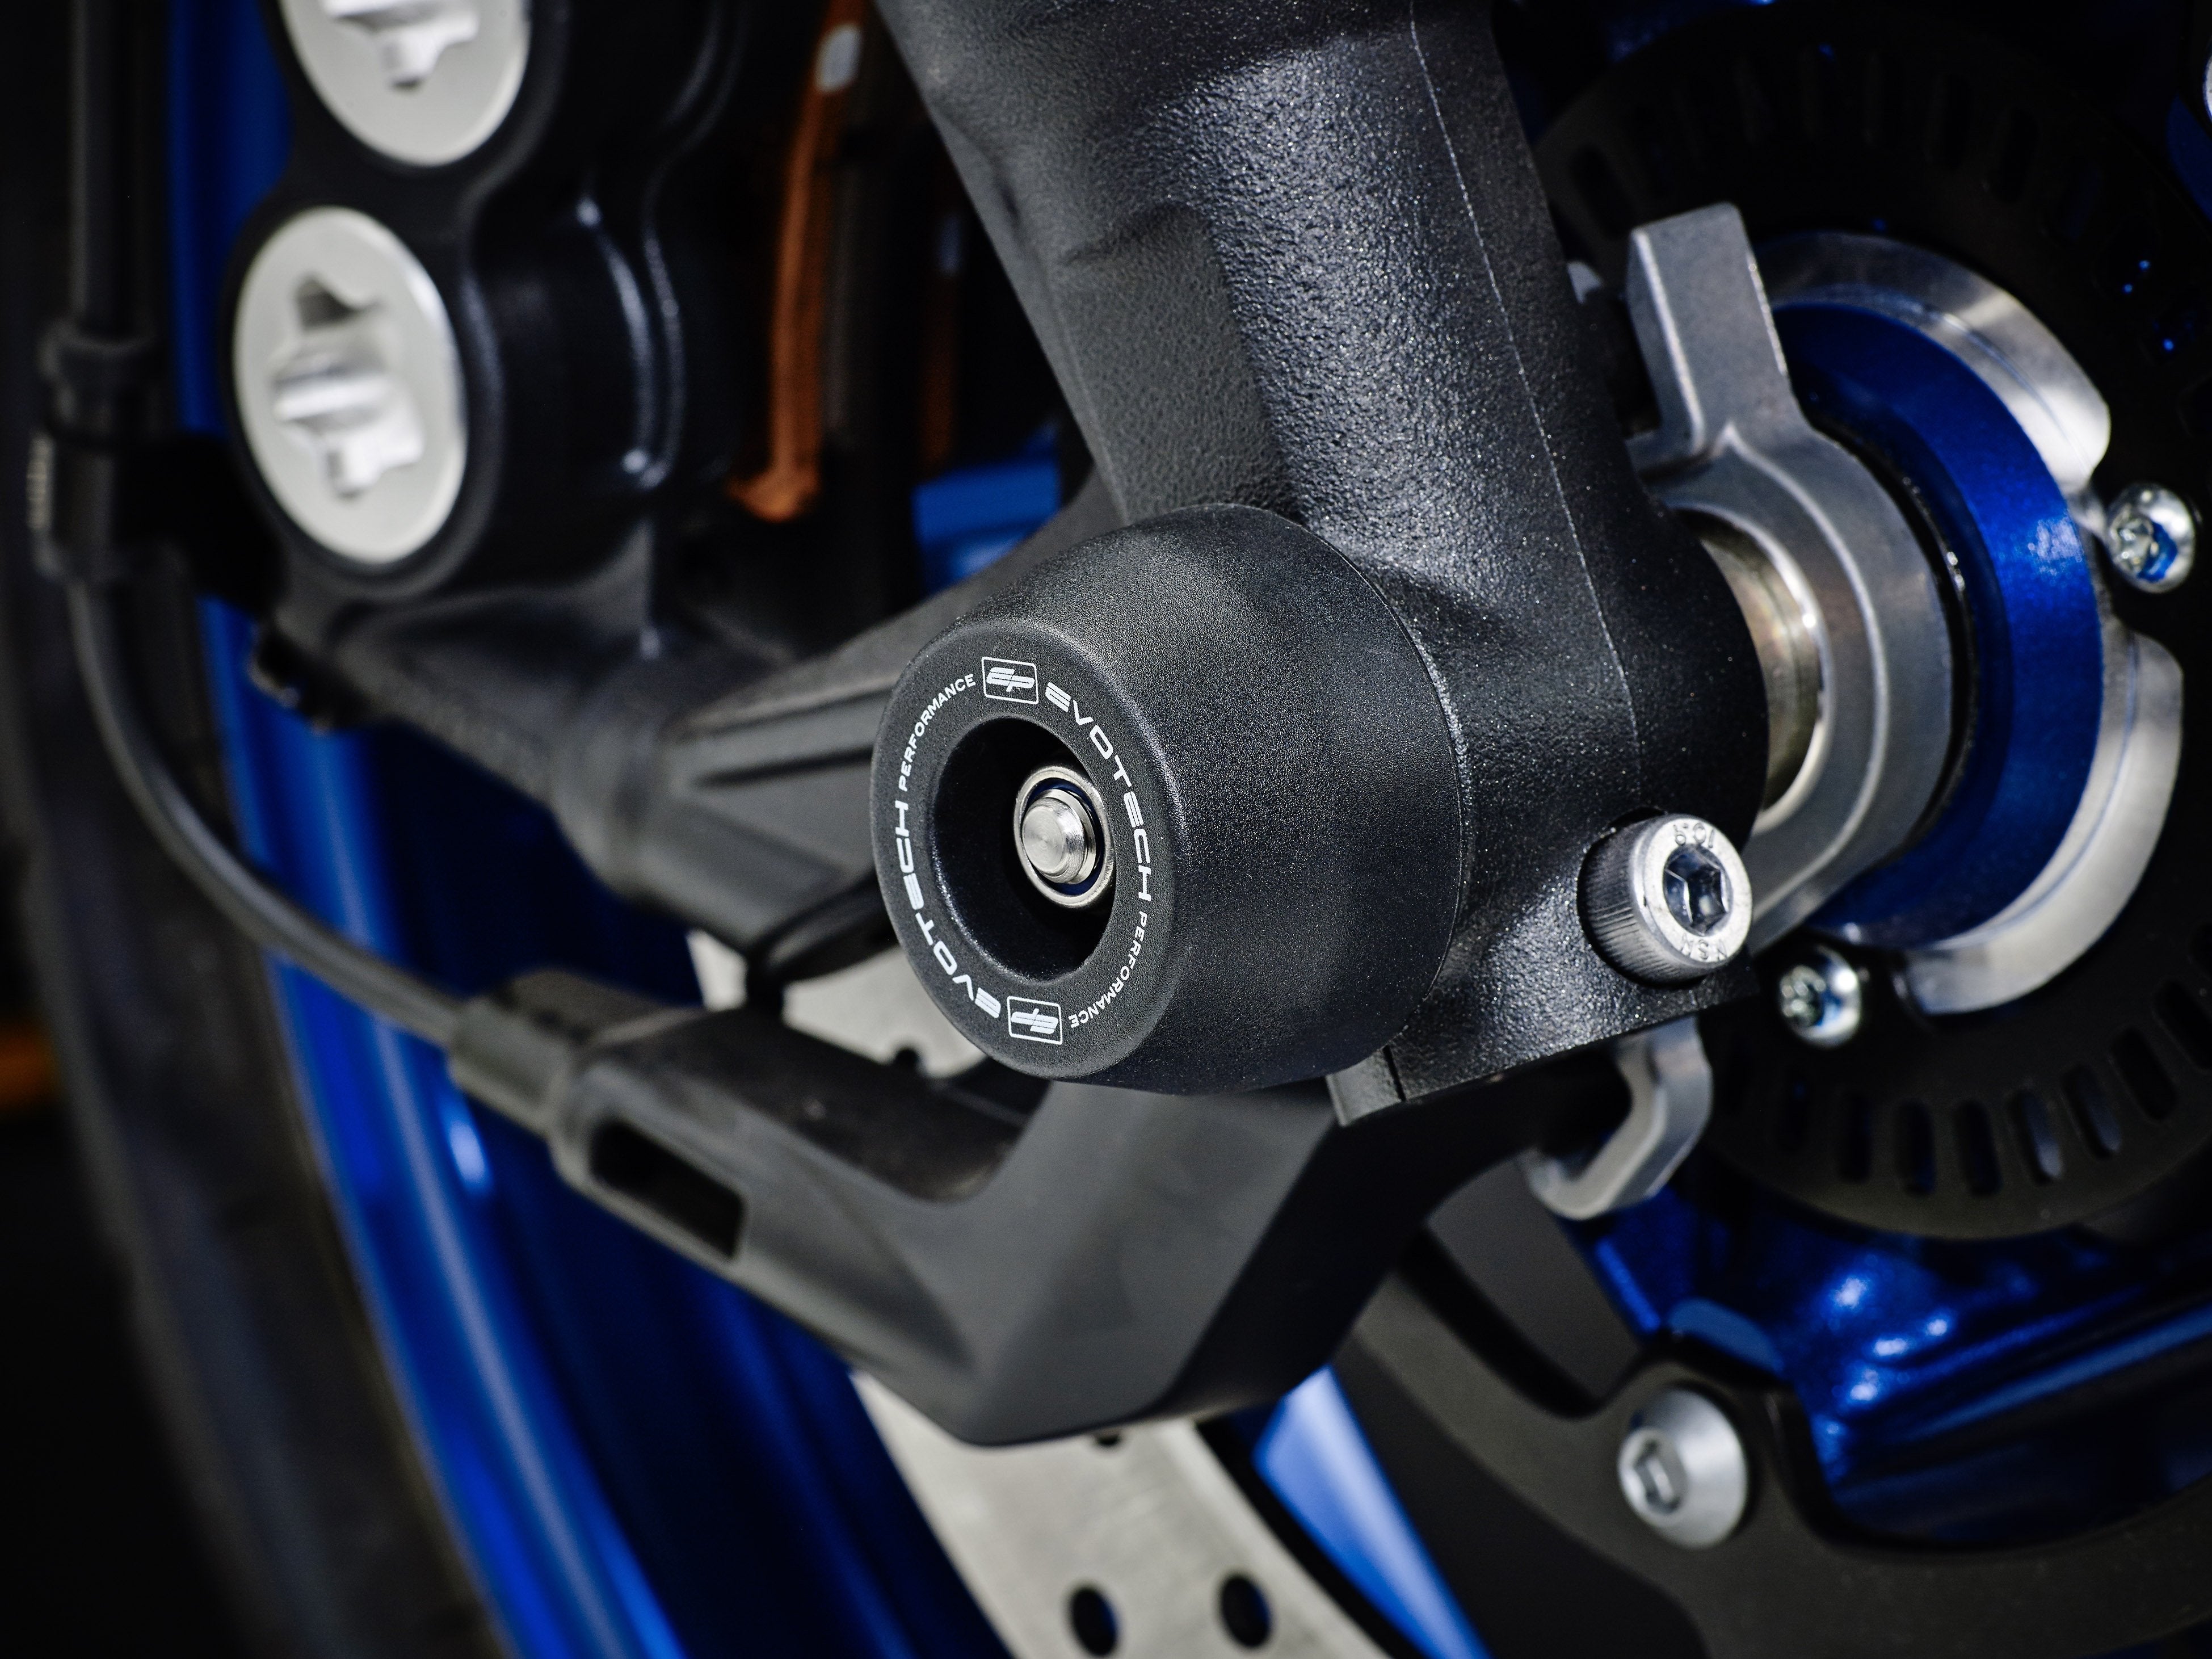 EP Spindle Bobbins Crash Protection seamlessly added to the front wheel of the Yamaha MT-09 offering front fork protection.